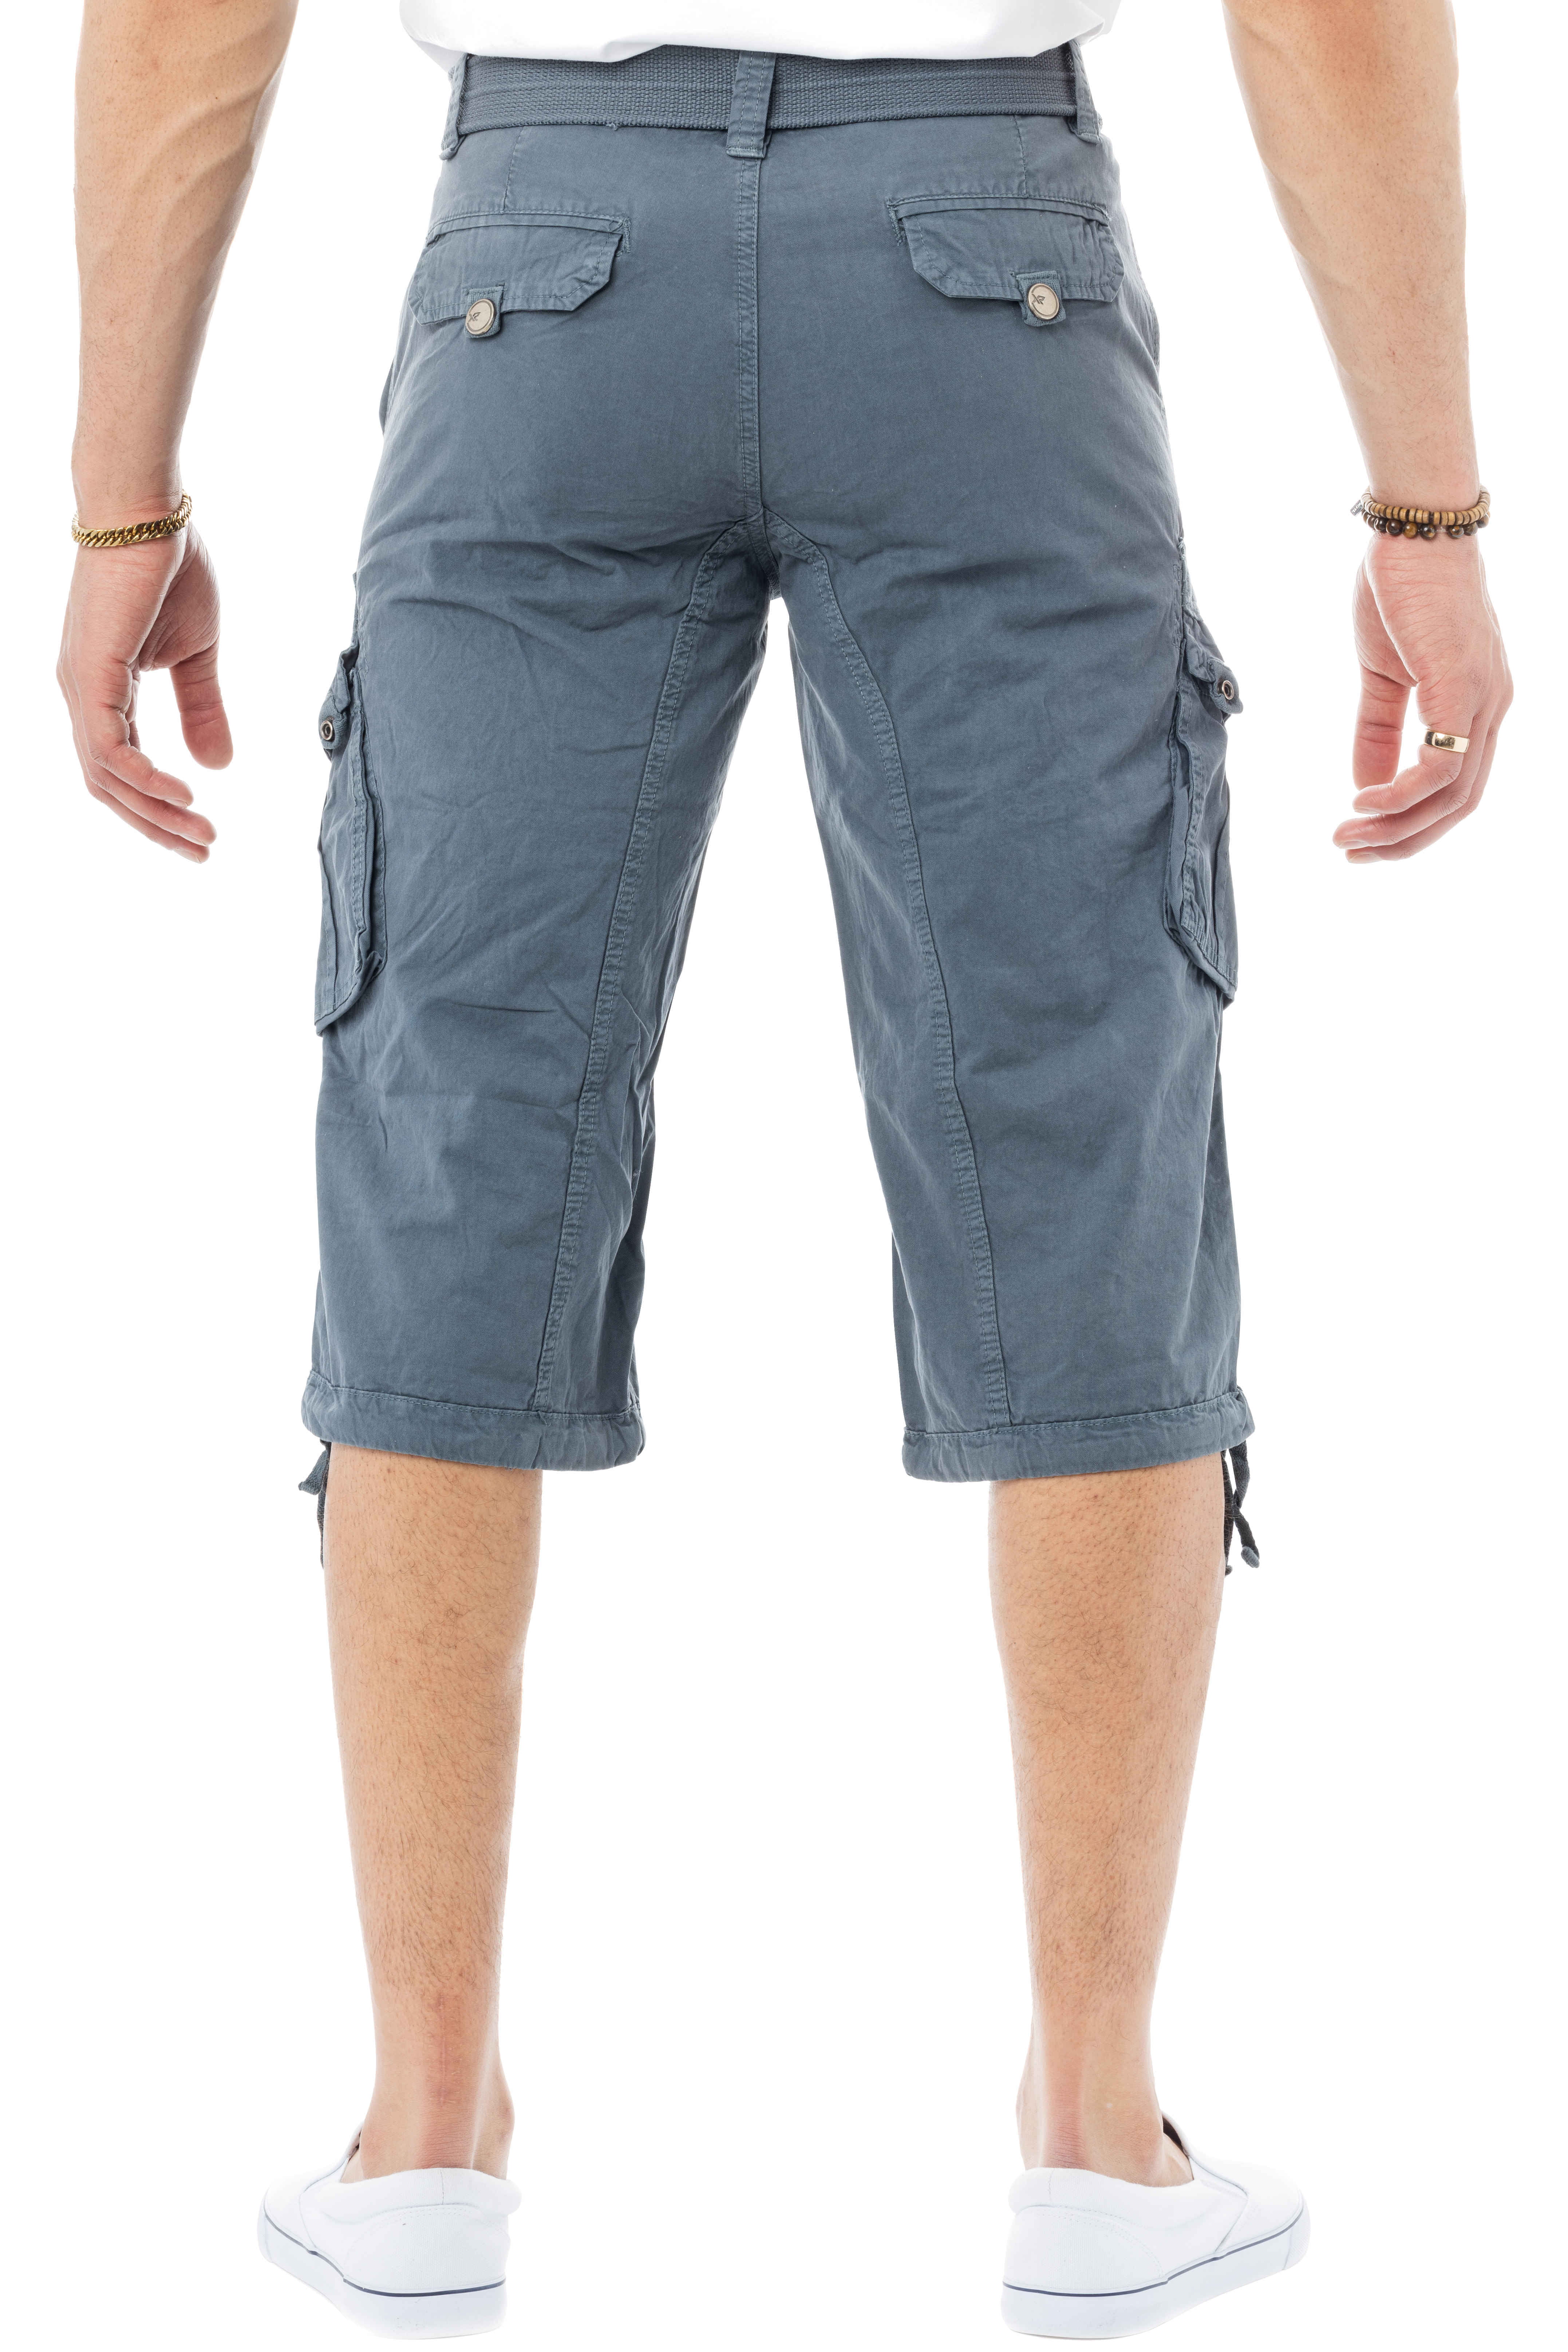 DONGD Mens Cargo Shorts 3/4 Relaxted Fit Capri Pants Below Knee Cargo Short  Army Green | Amazon.com